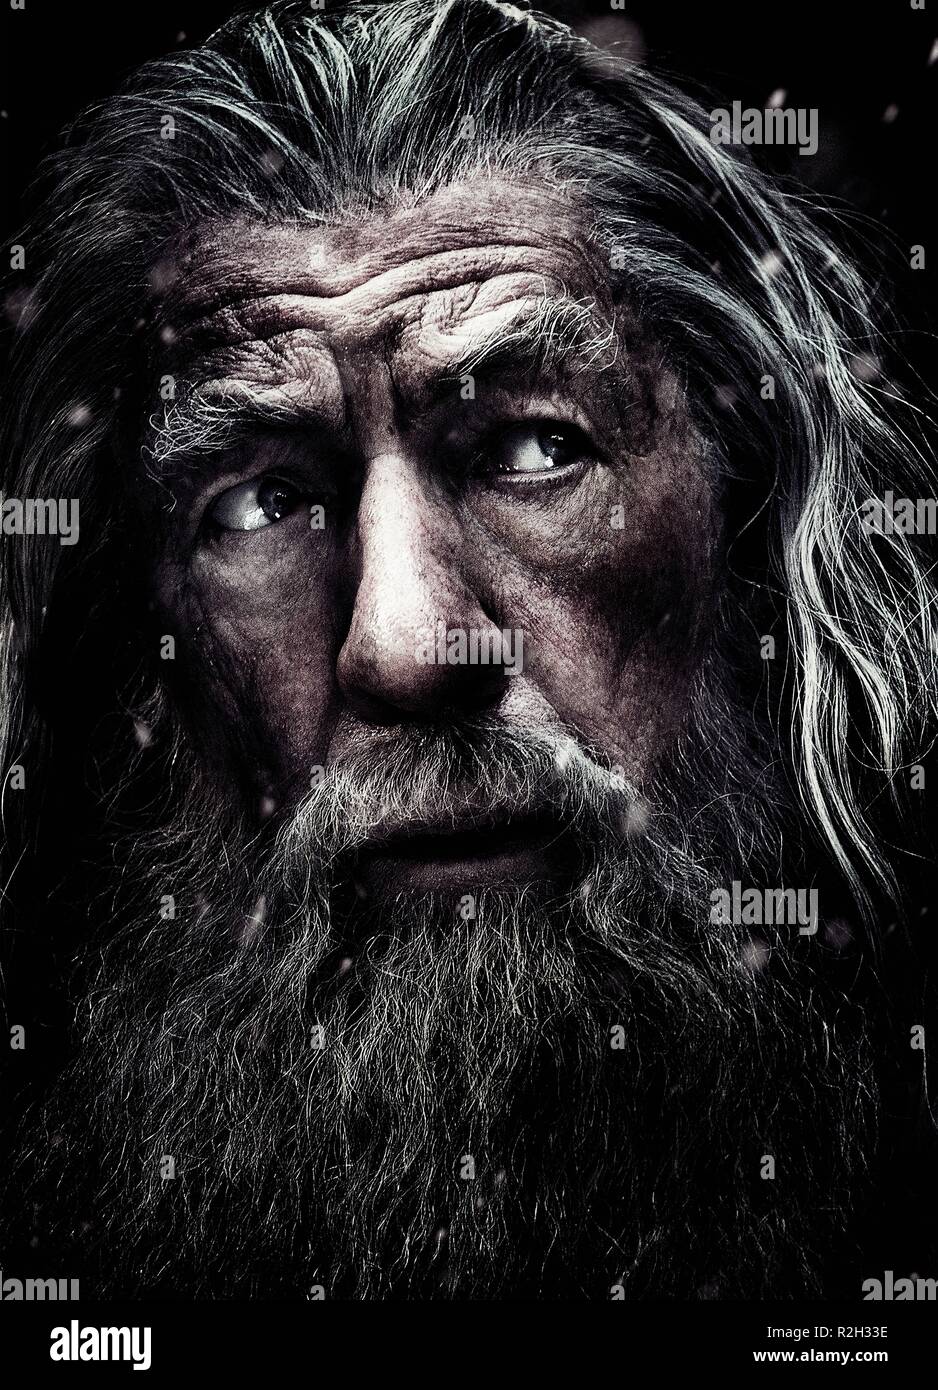 The Hobbit : The Battle of the Five Armies Year : 2014 New Zealand / USA Director : Peter Jackson Ian McKellen Movie poster (textless) Stock Photo